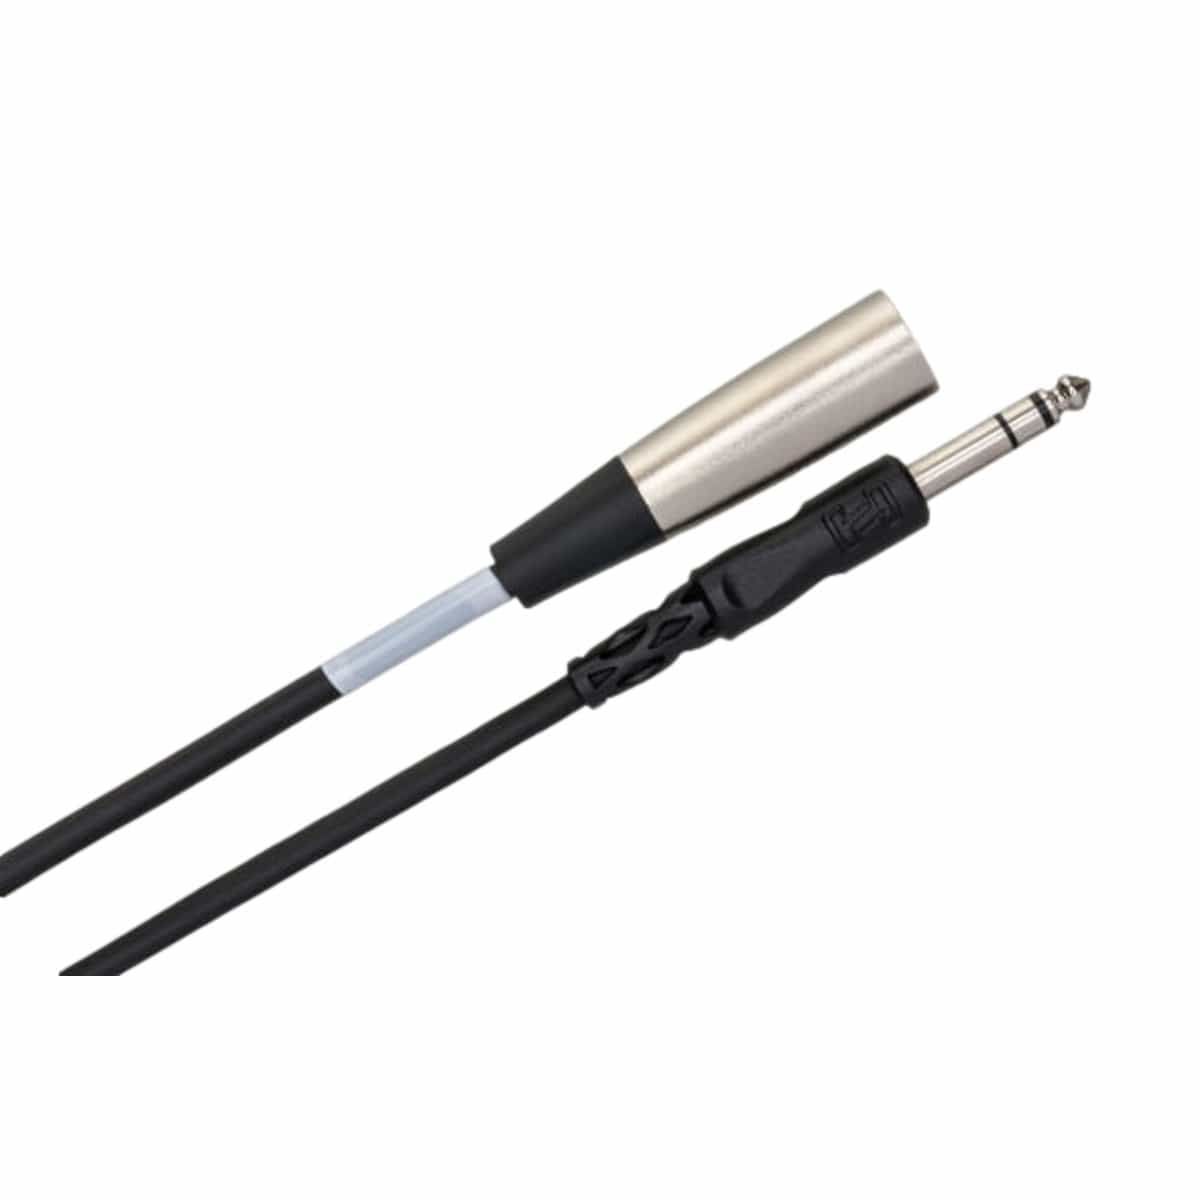 Hosa Recording Hosa Balanced Interconnect Cable 1/4in TRS to XLR M 10ft STX110M - Byron Music